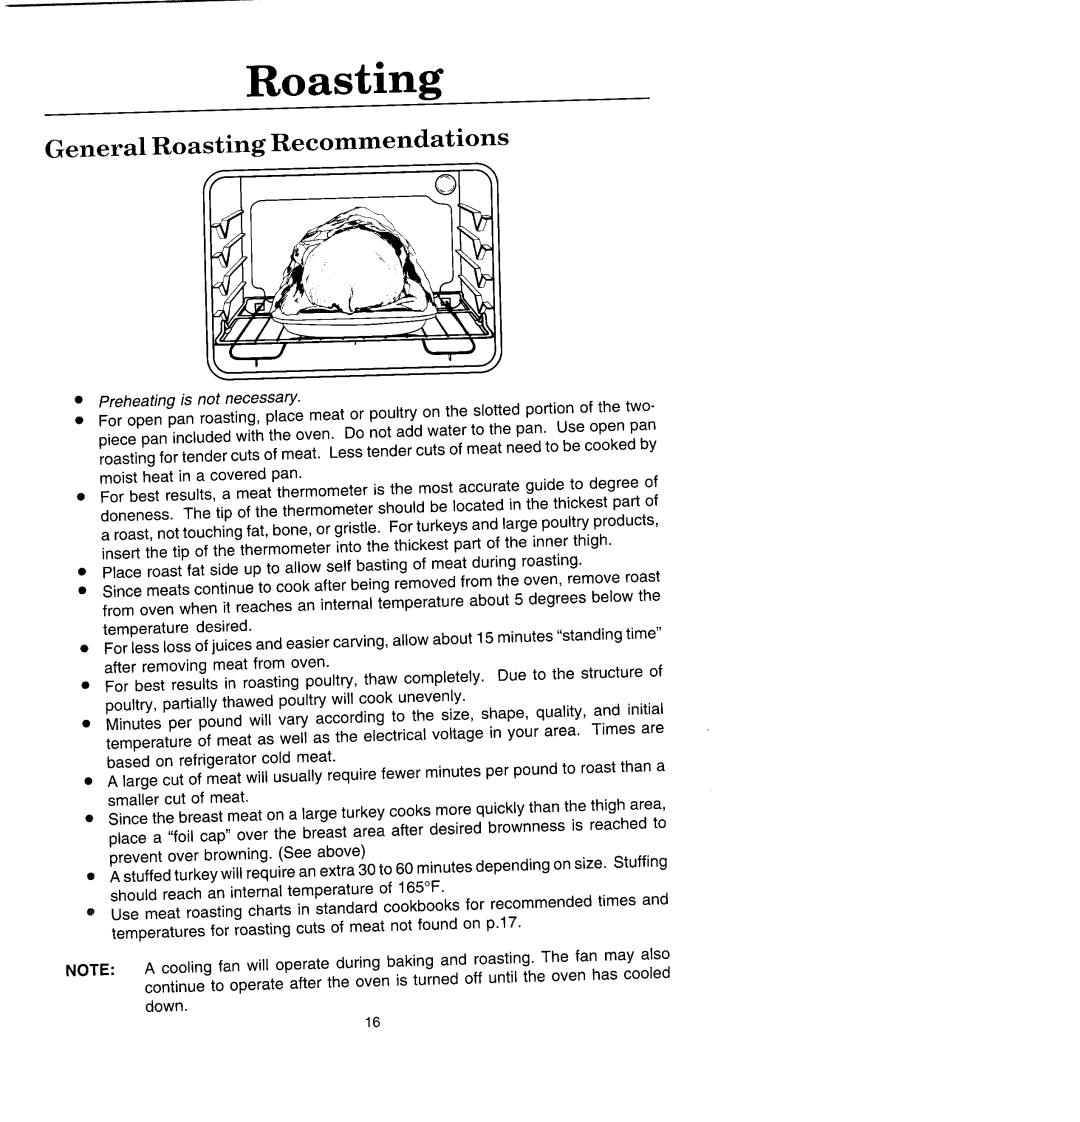 Jenn-Air W131 manual General Roasting Recommendations, Preheating is not necessary 